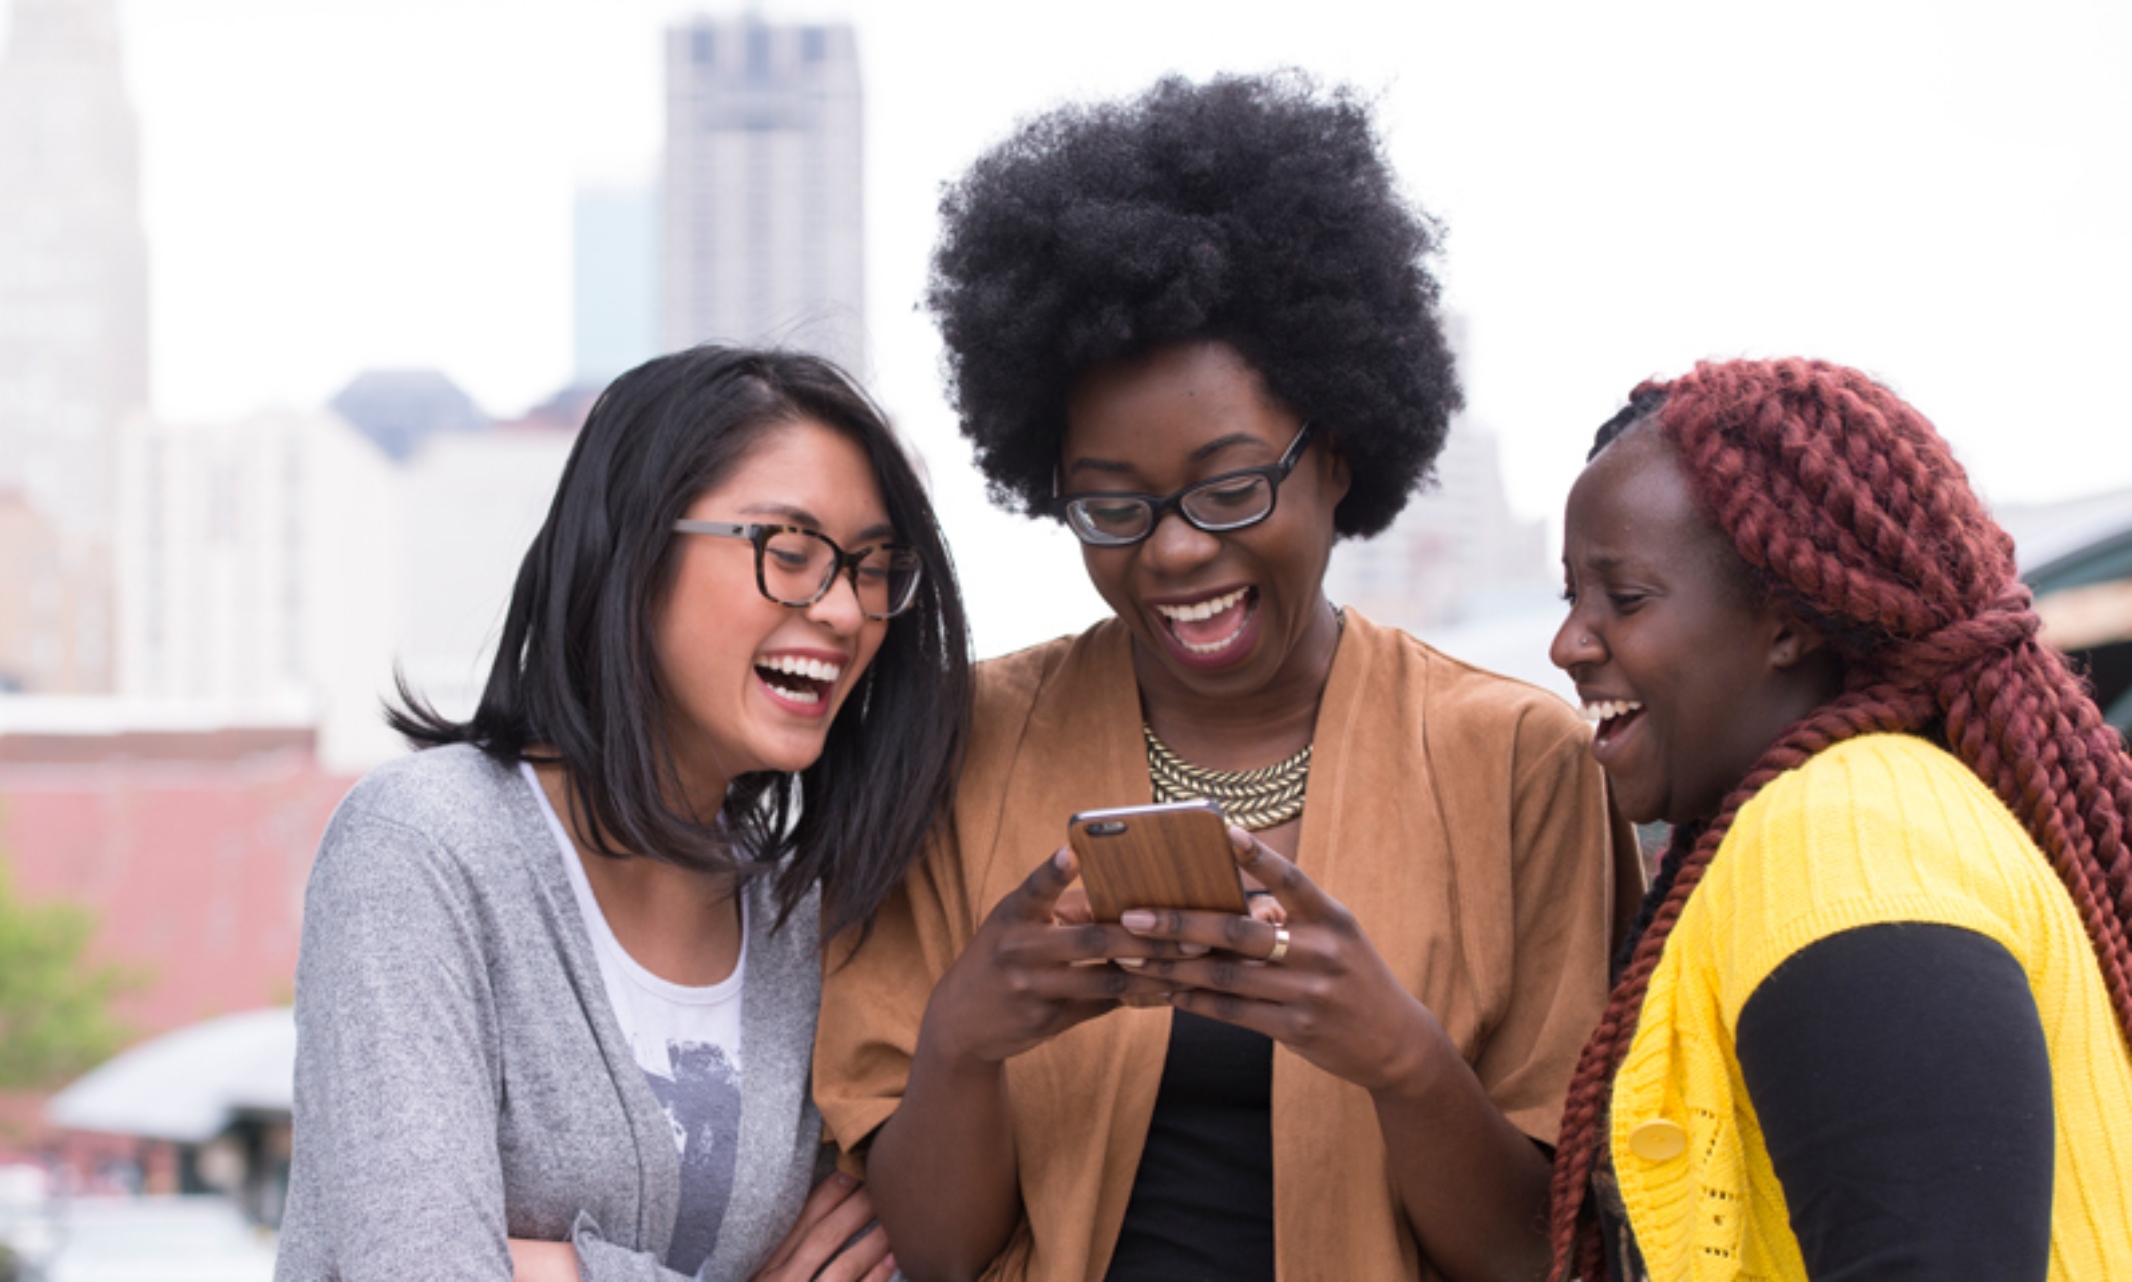 three women look at a cell phone and laugh